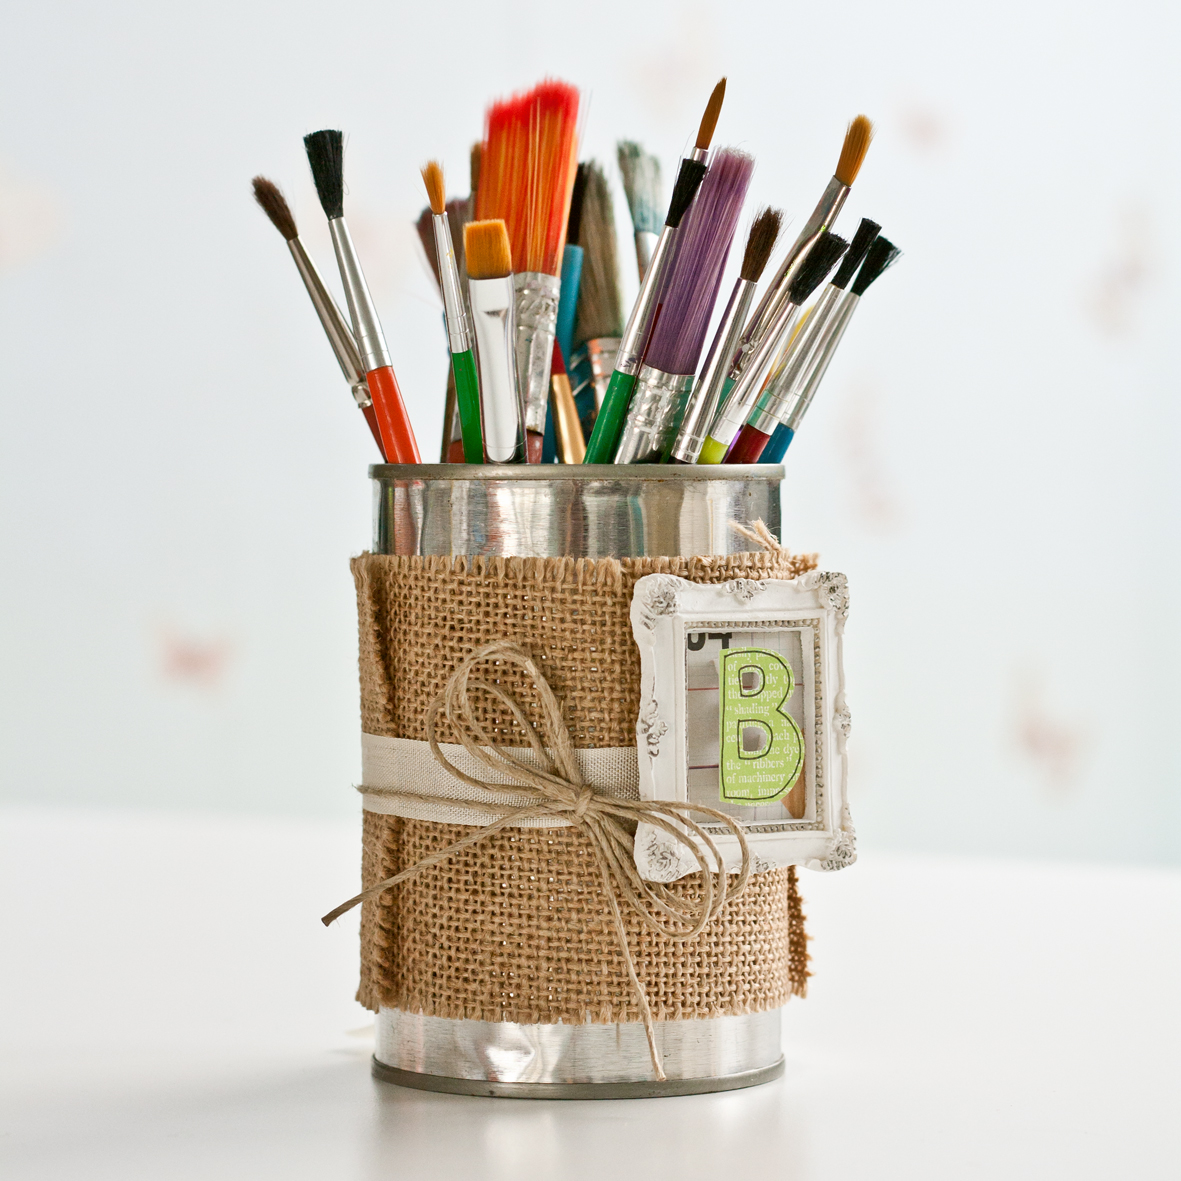 Tin can upcycled into a brush holder